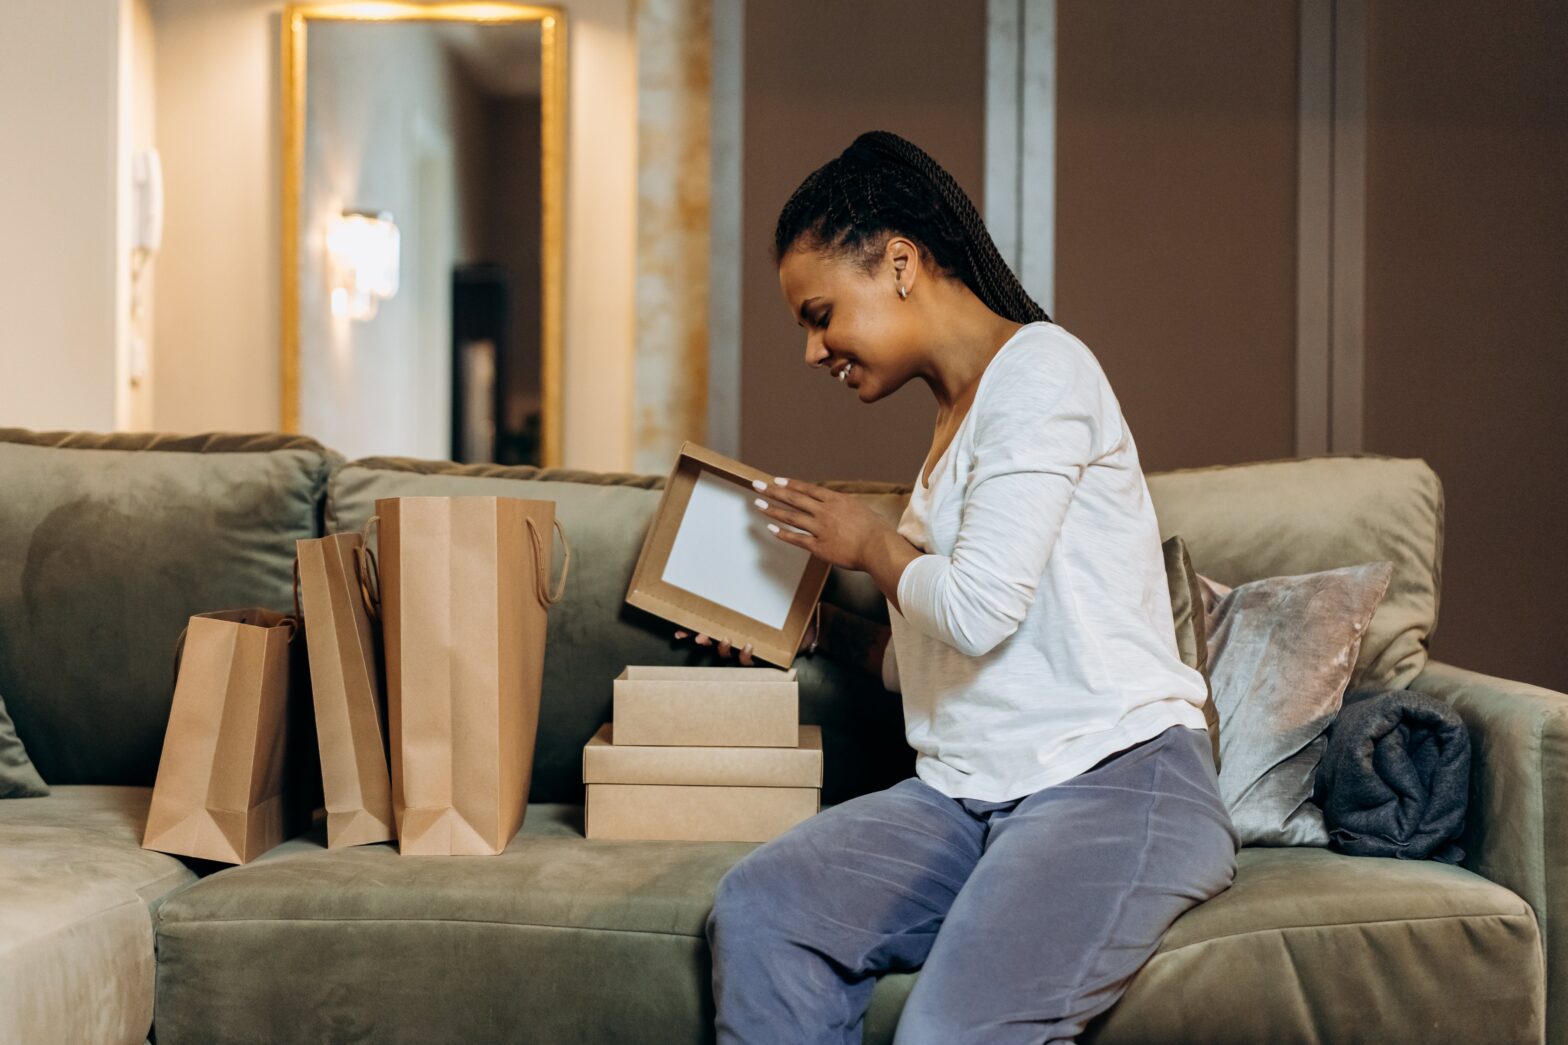 Black-woman-sitting-on-couch-opening-brown-boxes-and-paper-bags